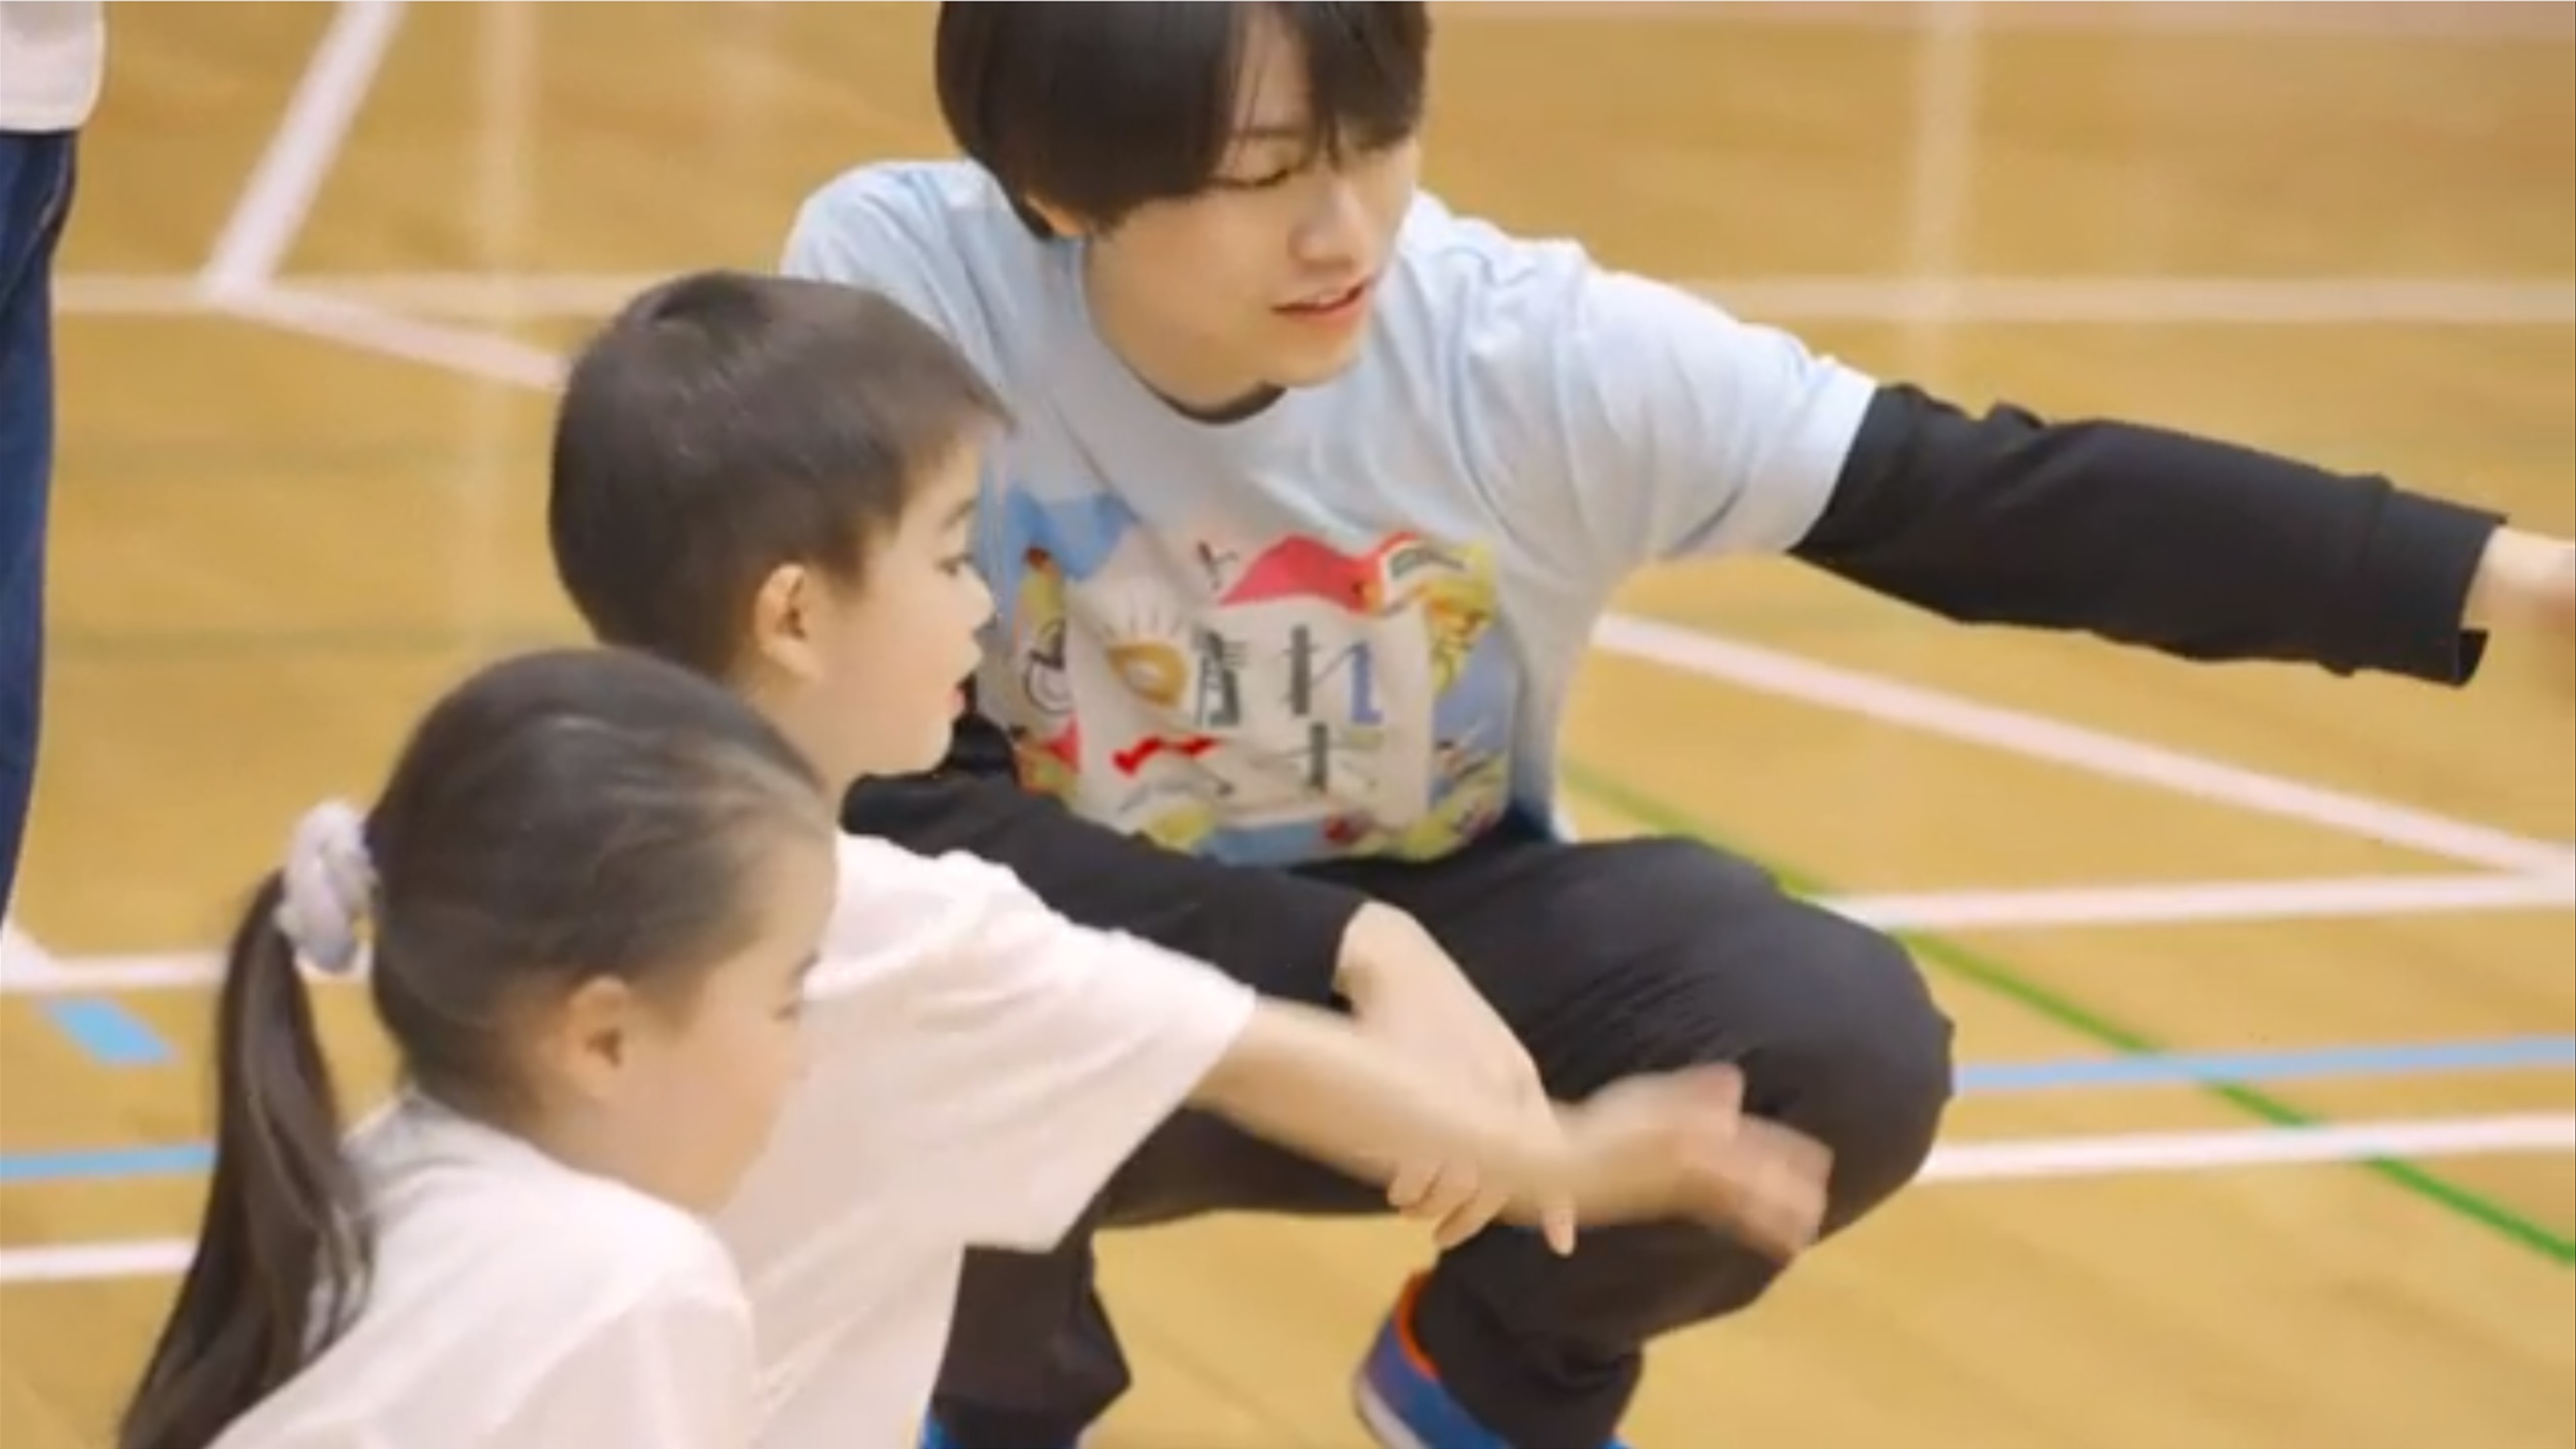 「MS＆AD Well-being Sports Project 『晴れスポ』」のイメージ動画が完成しました！